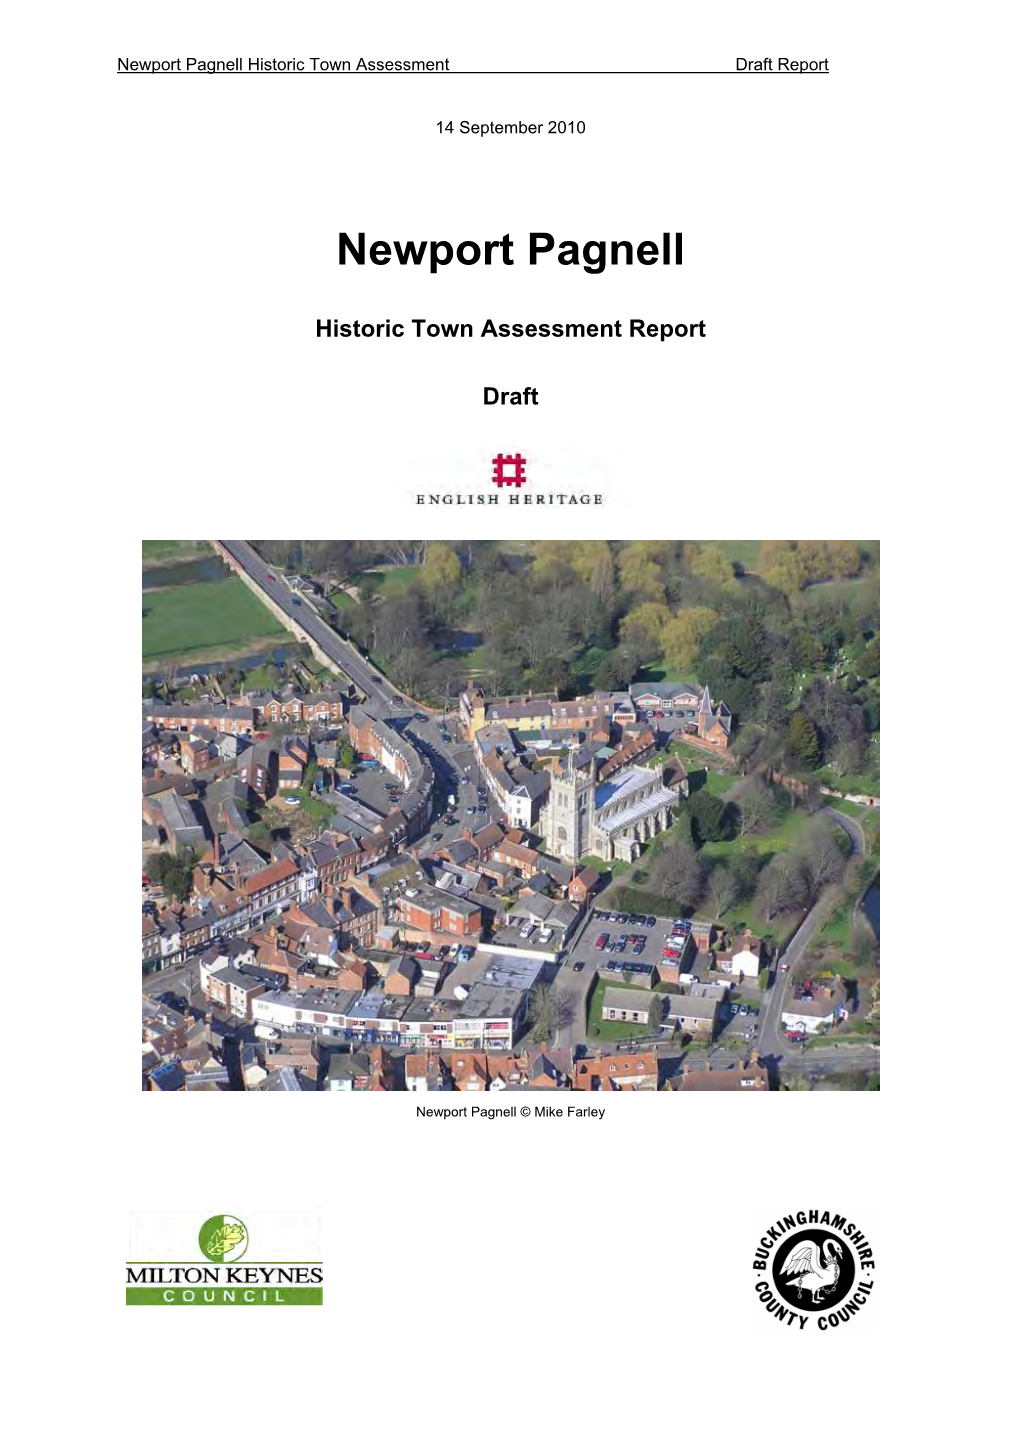 Newport Pagnell Historic Town Assessment Draft Report